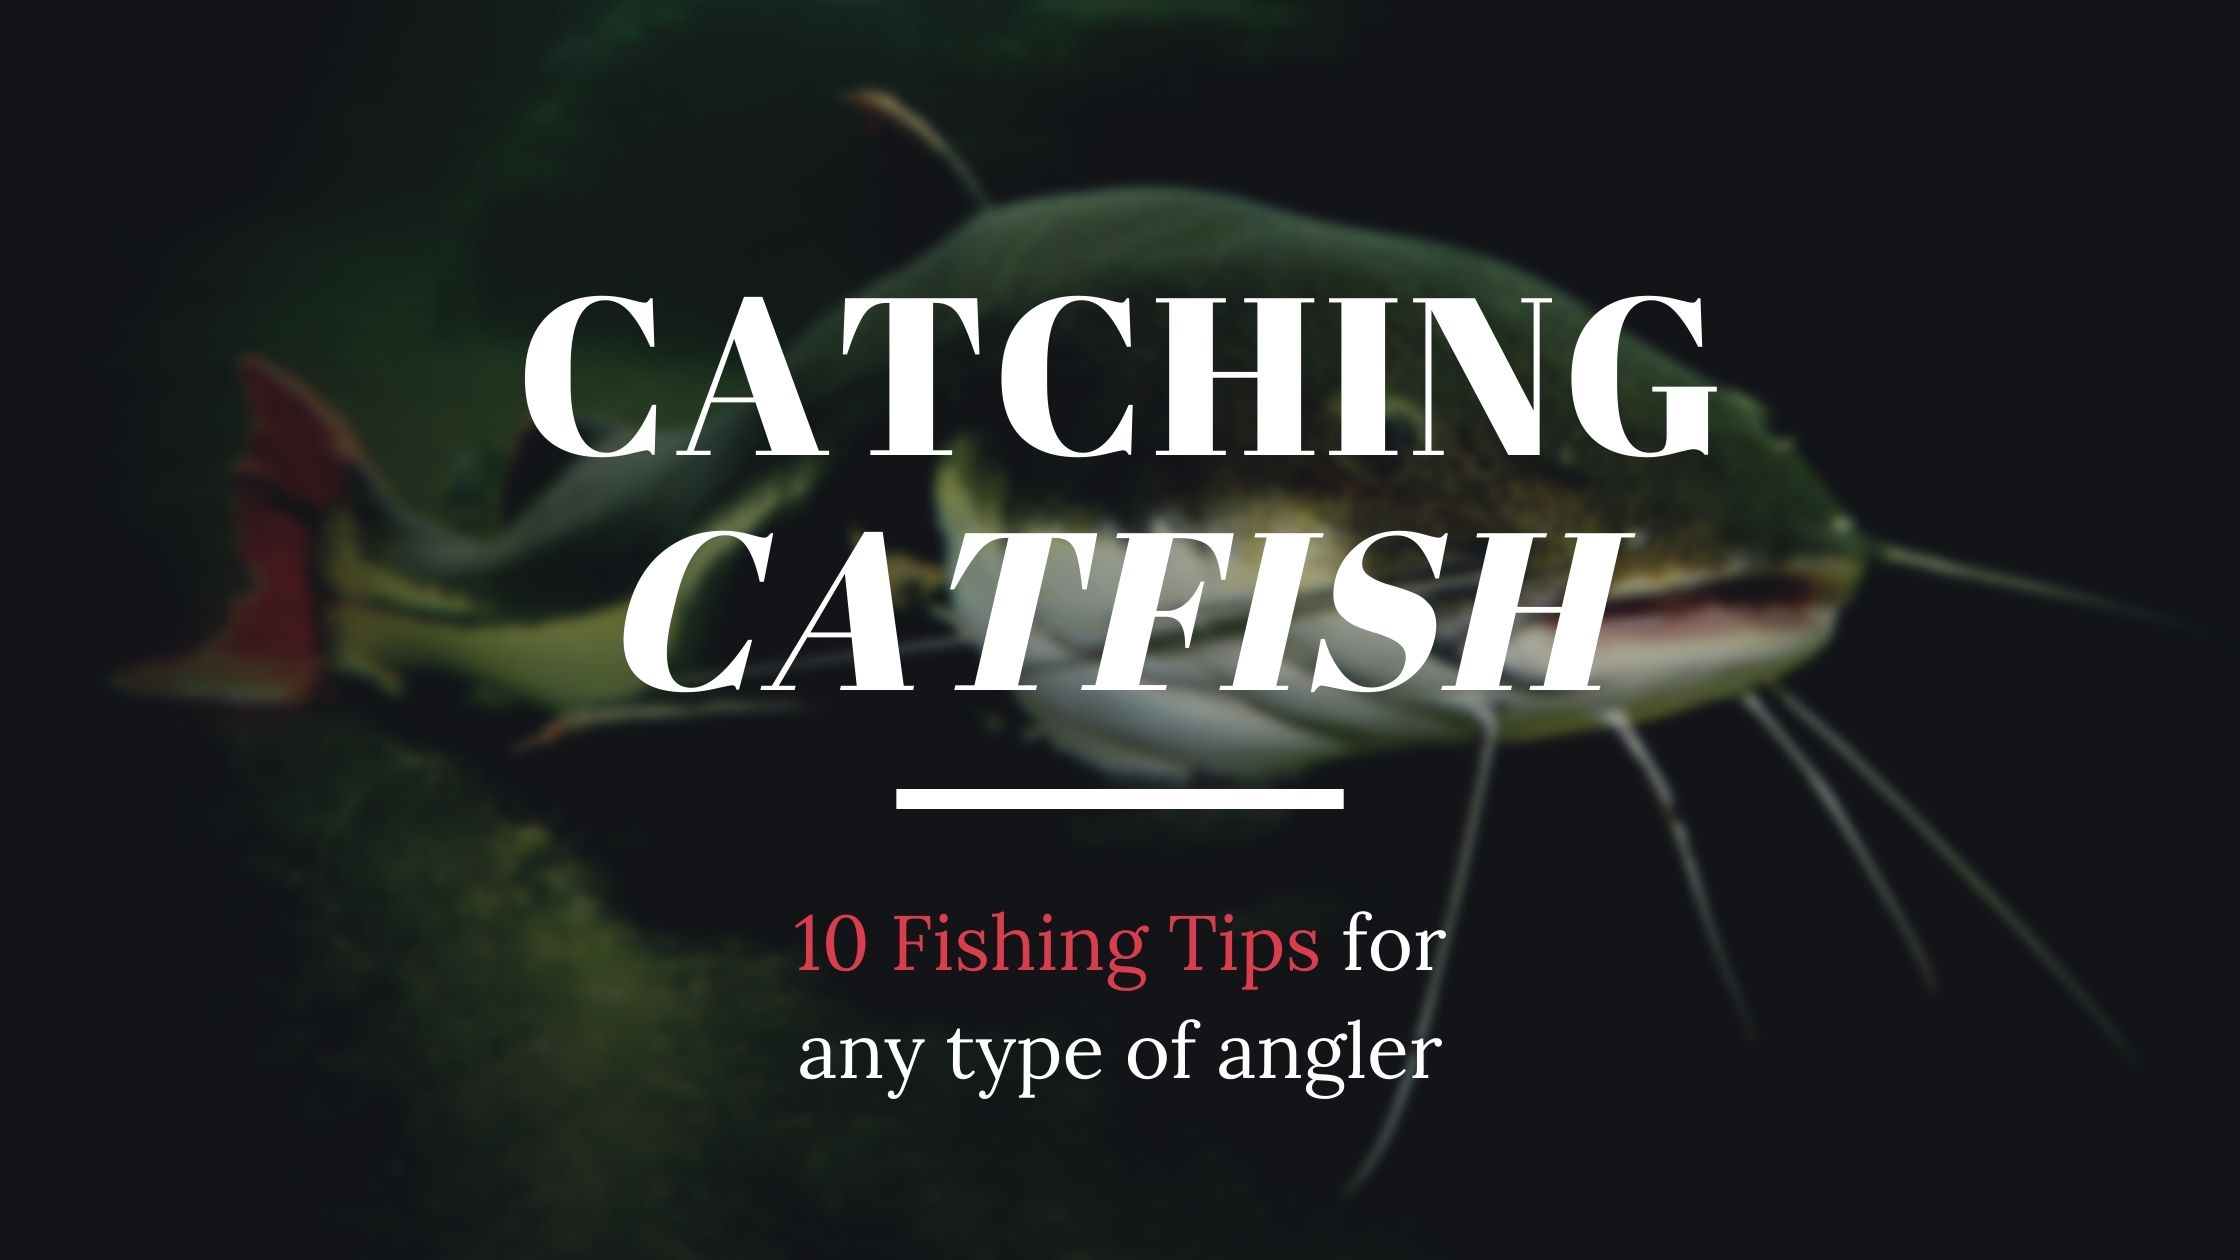 10 Fishing Tips for Catfish For Any Type of Angler